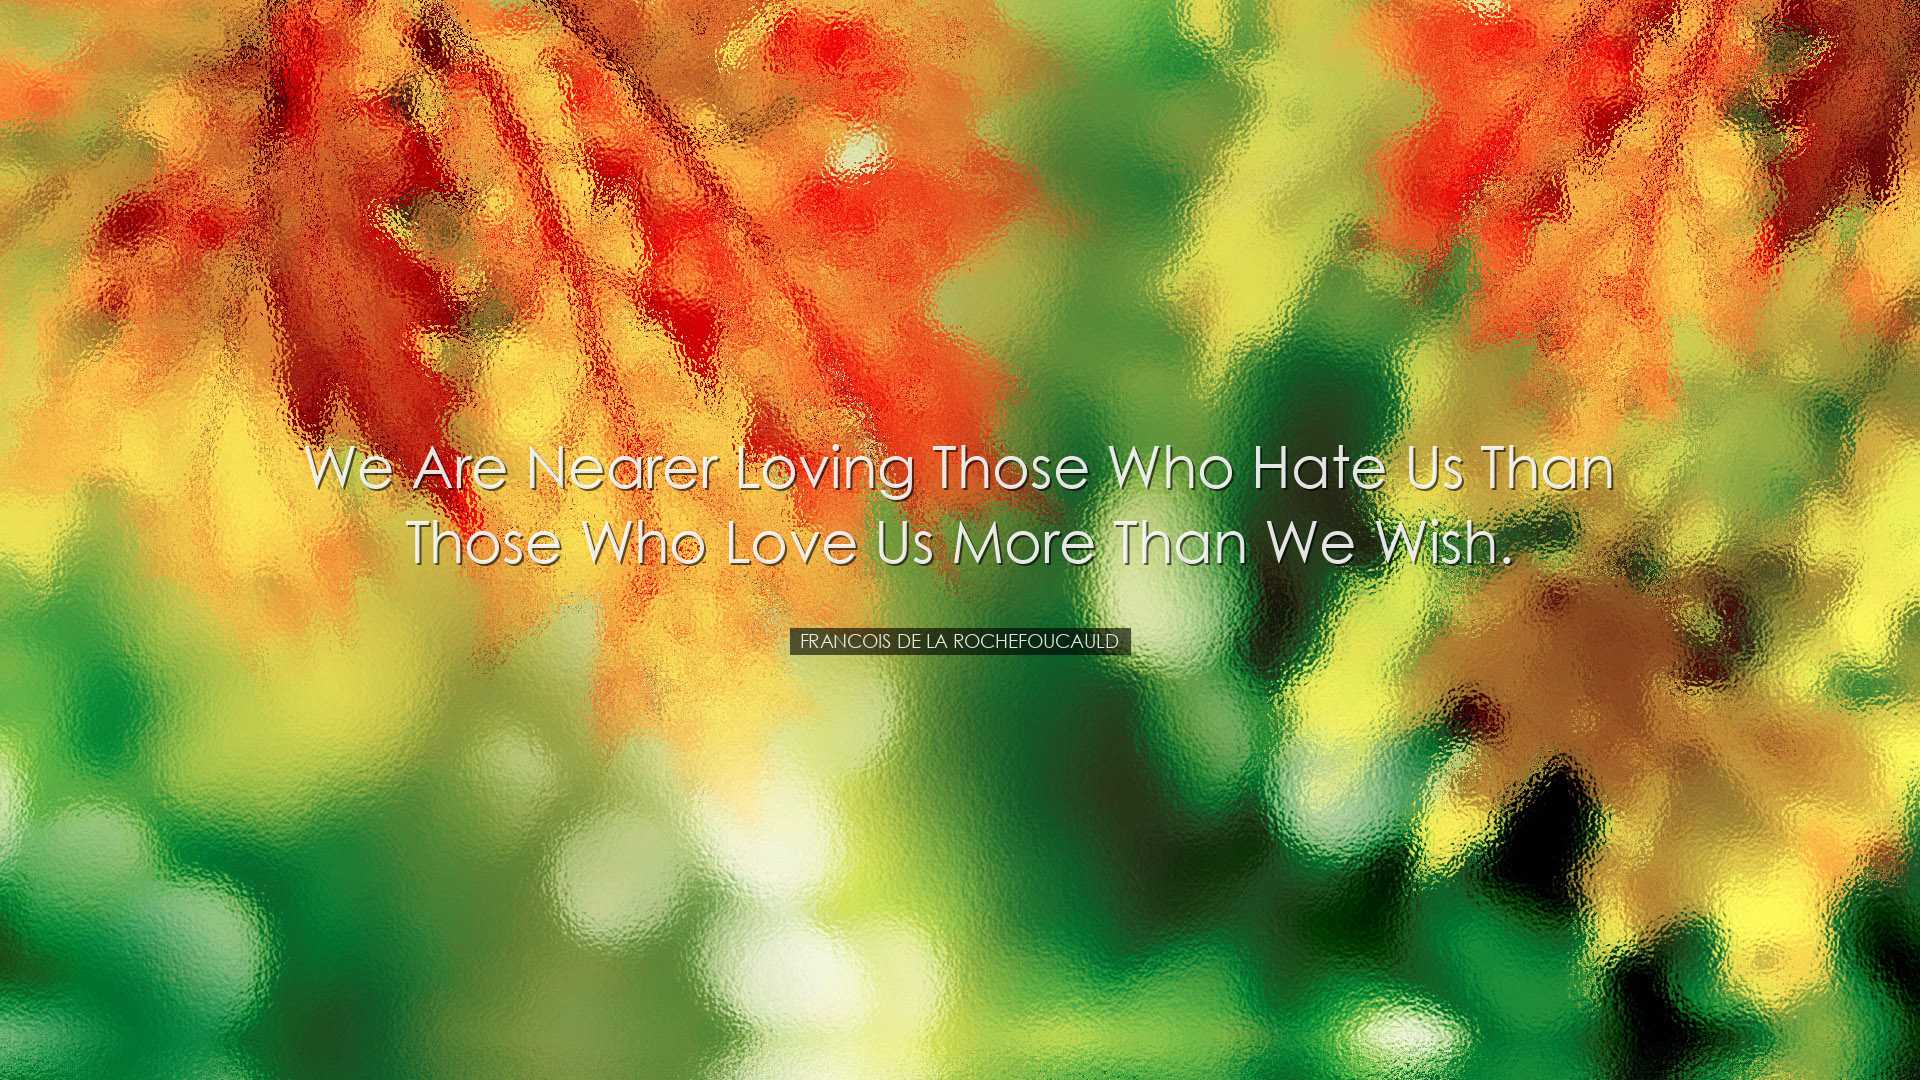 We are nearer loving those who hate us than those who love us more